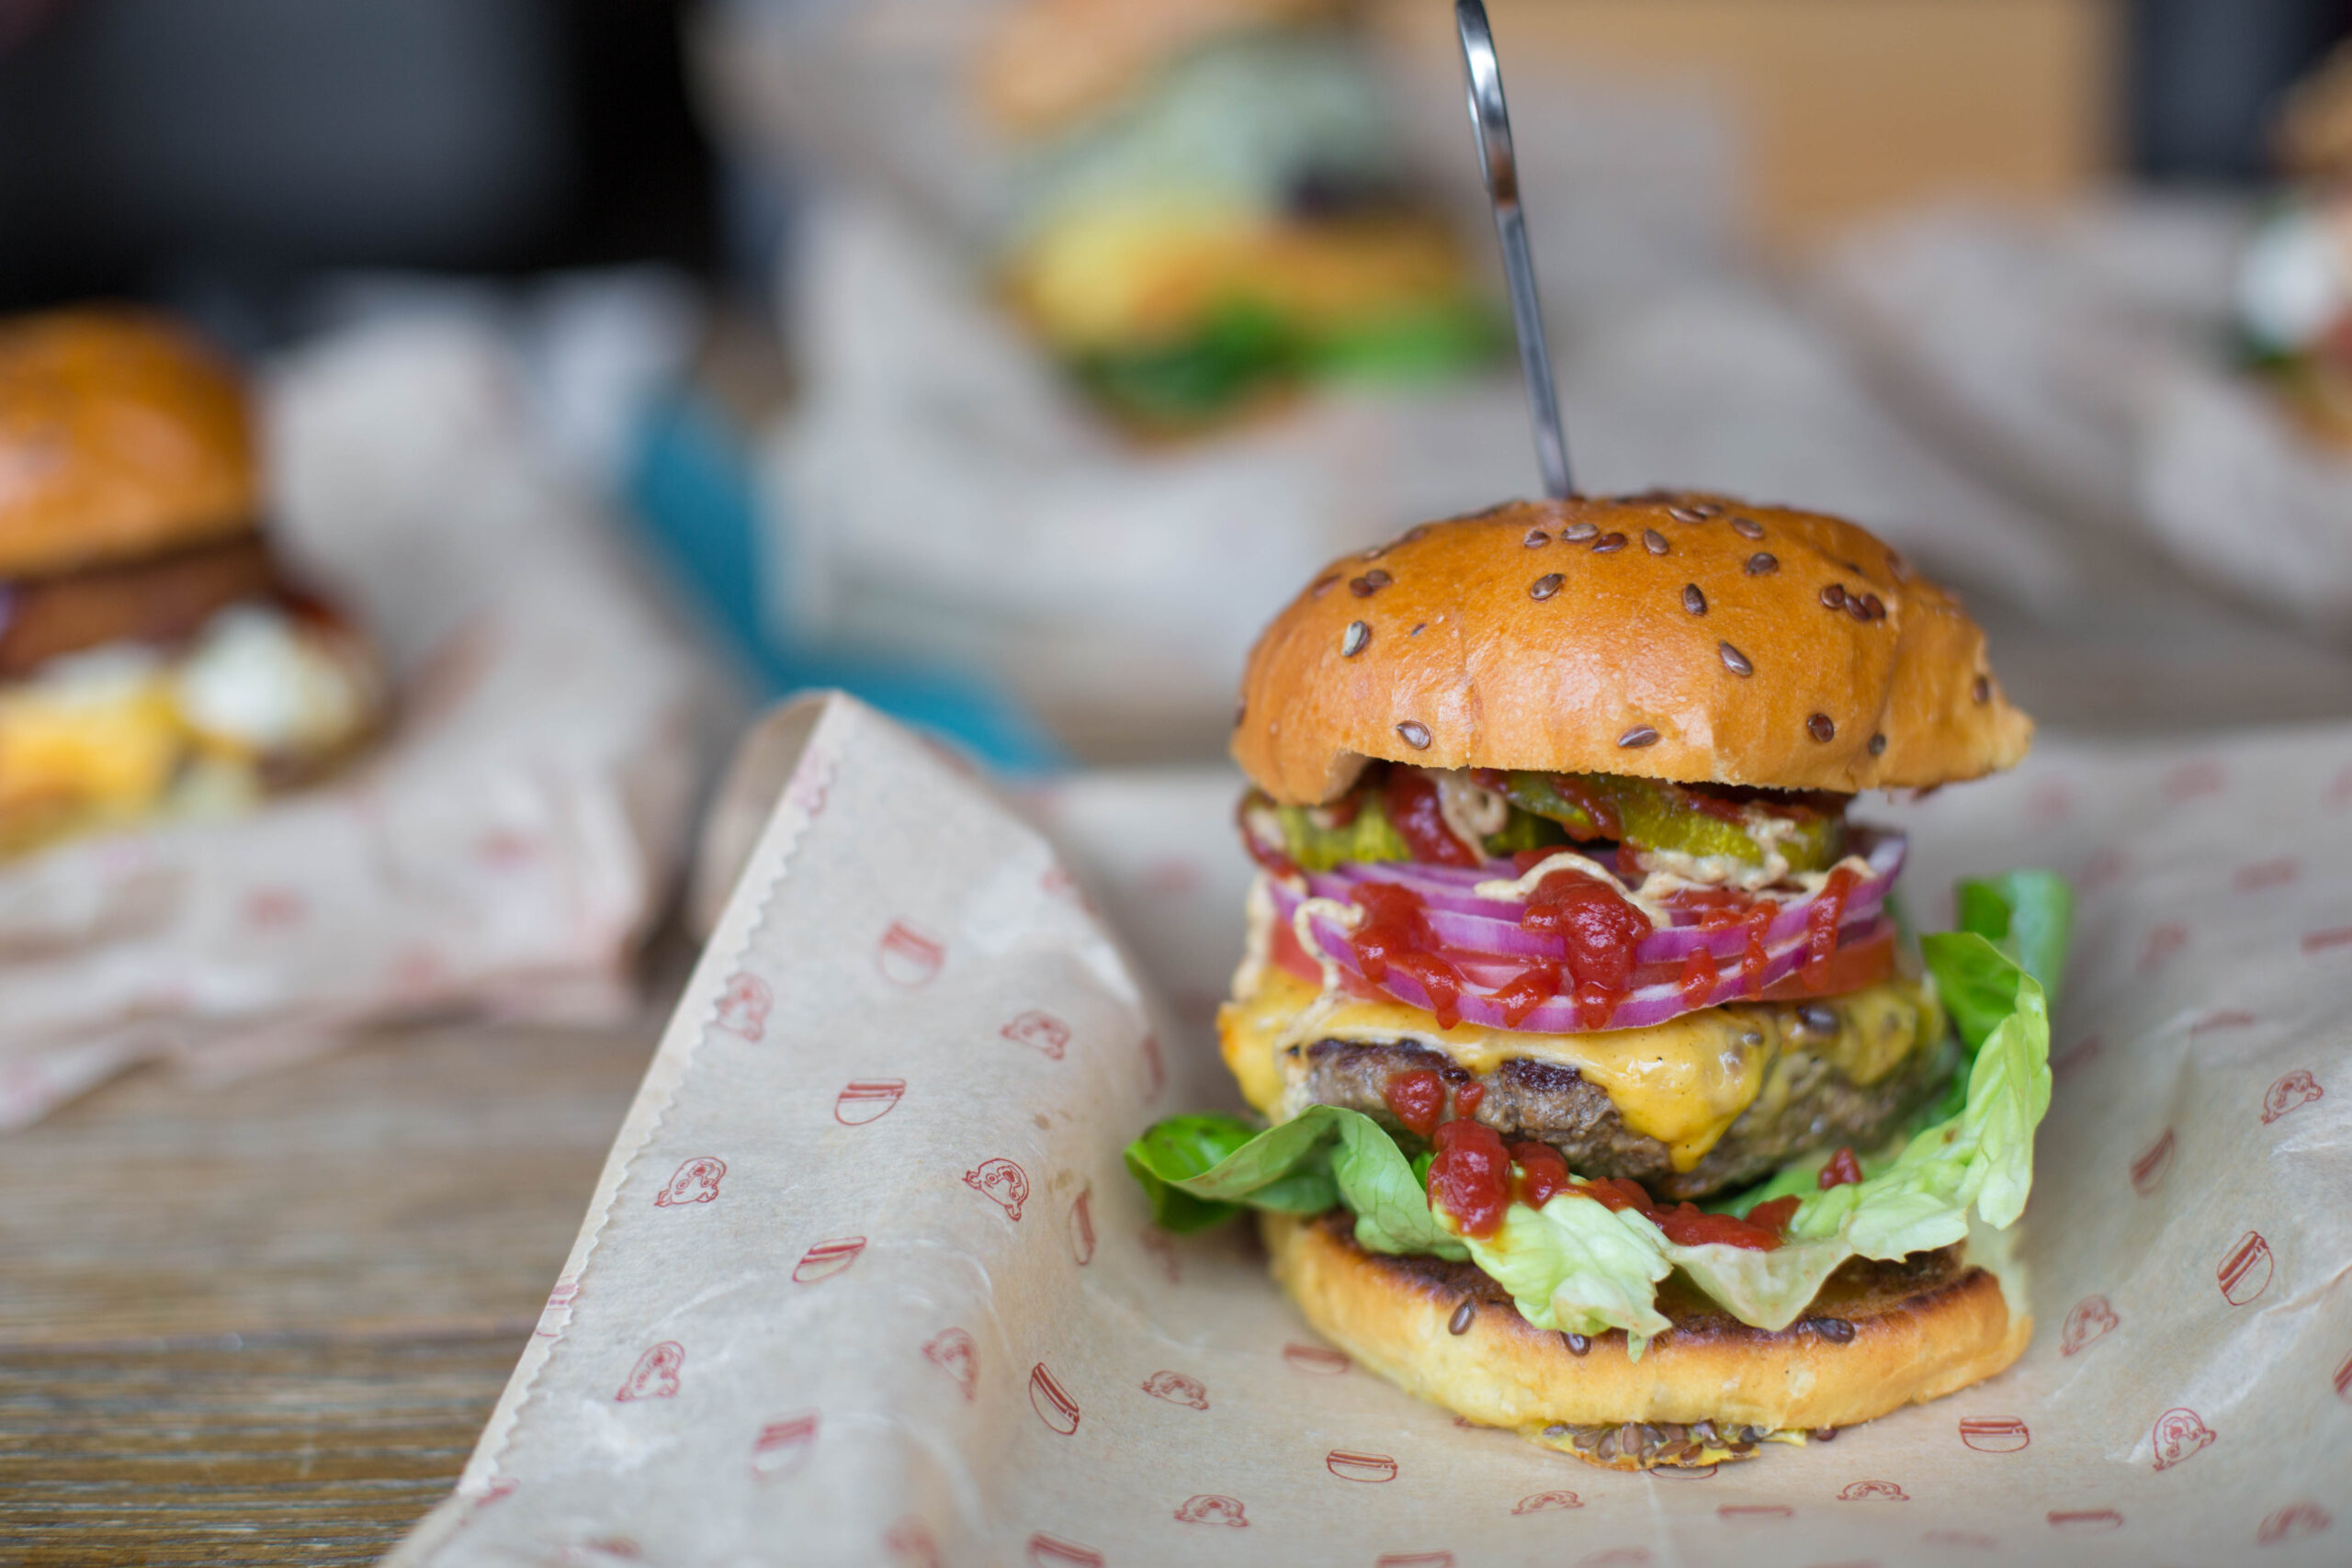 Celebrate National Burger Day with Bareburger